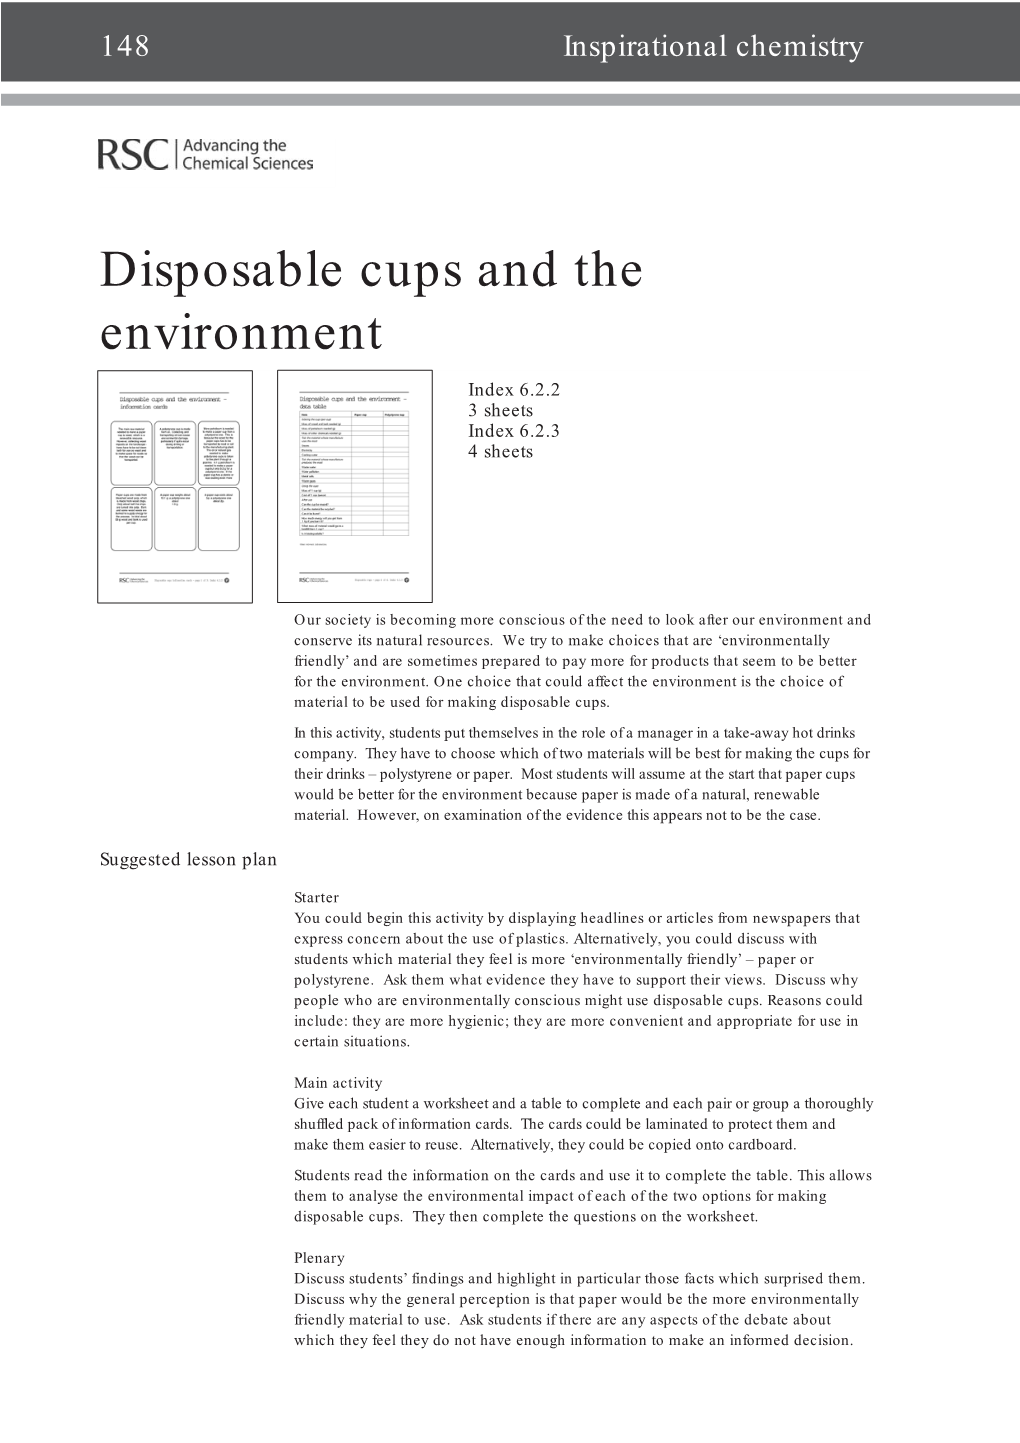 Disposable Cups and the Environment